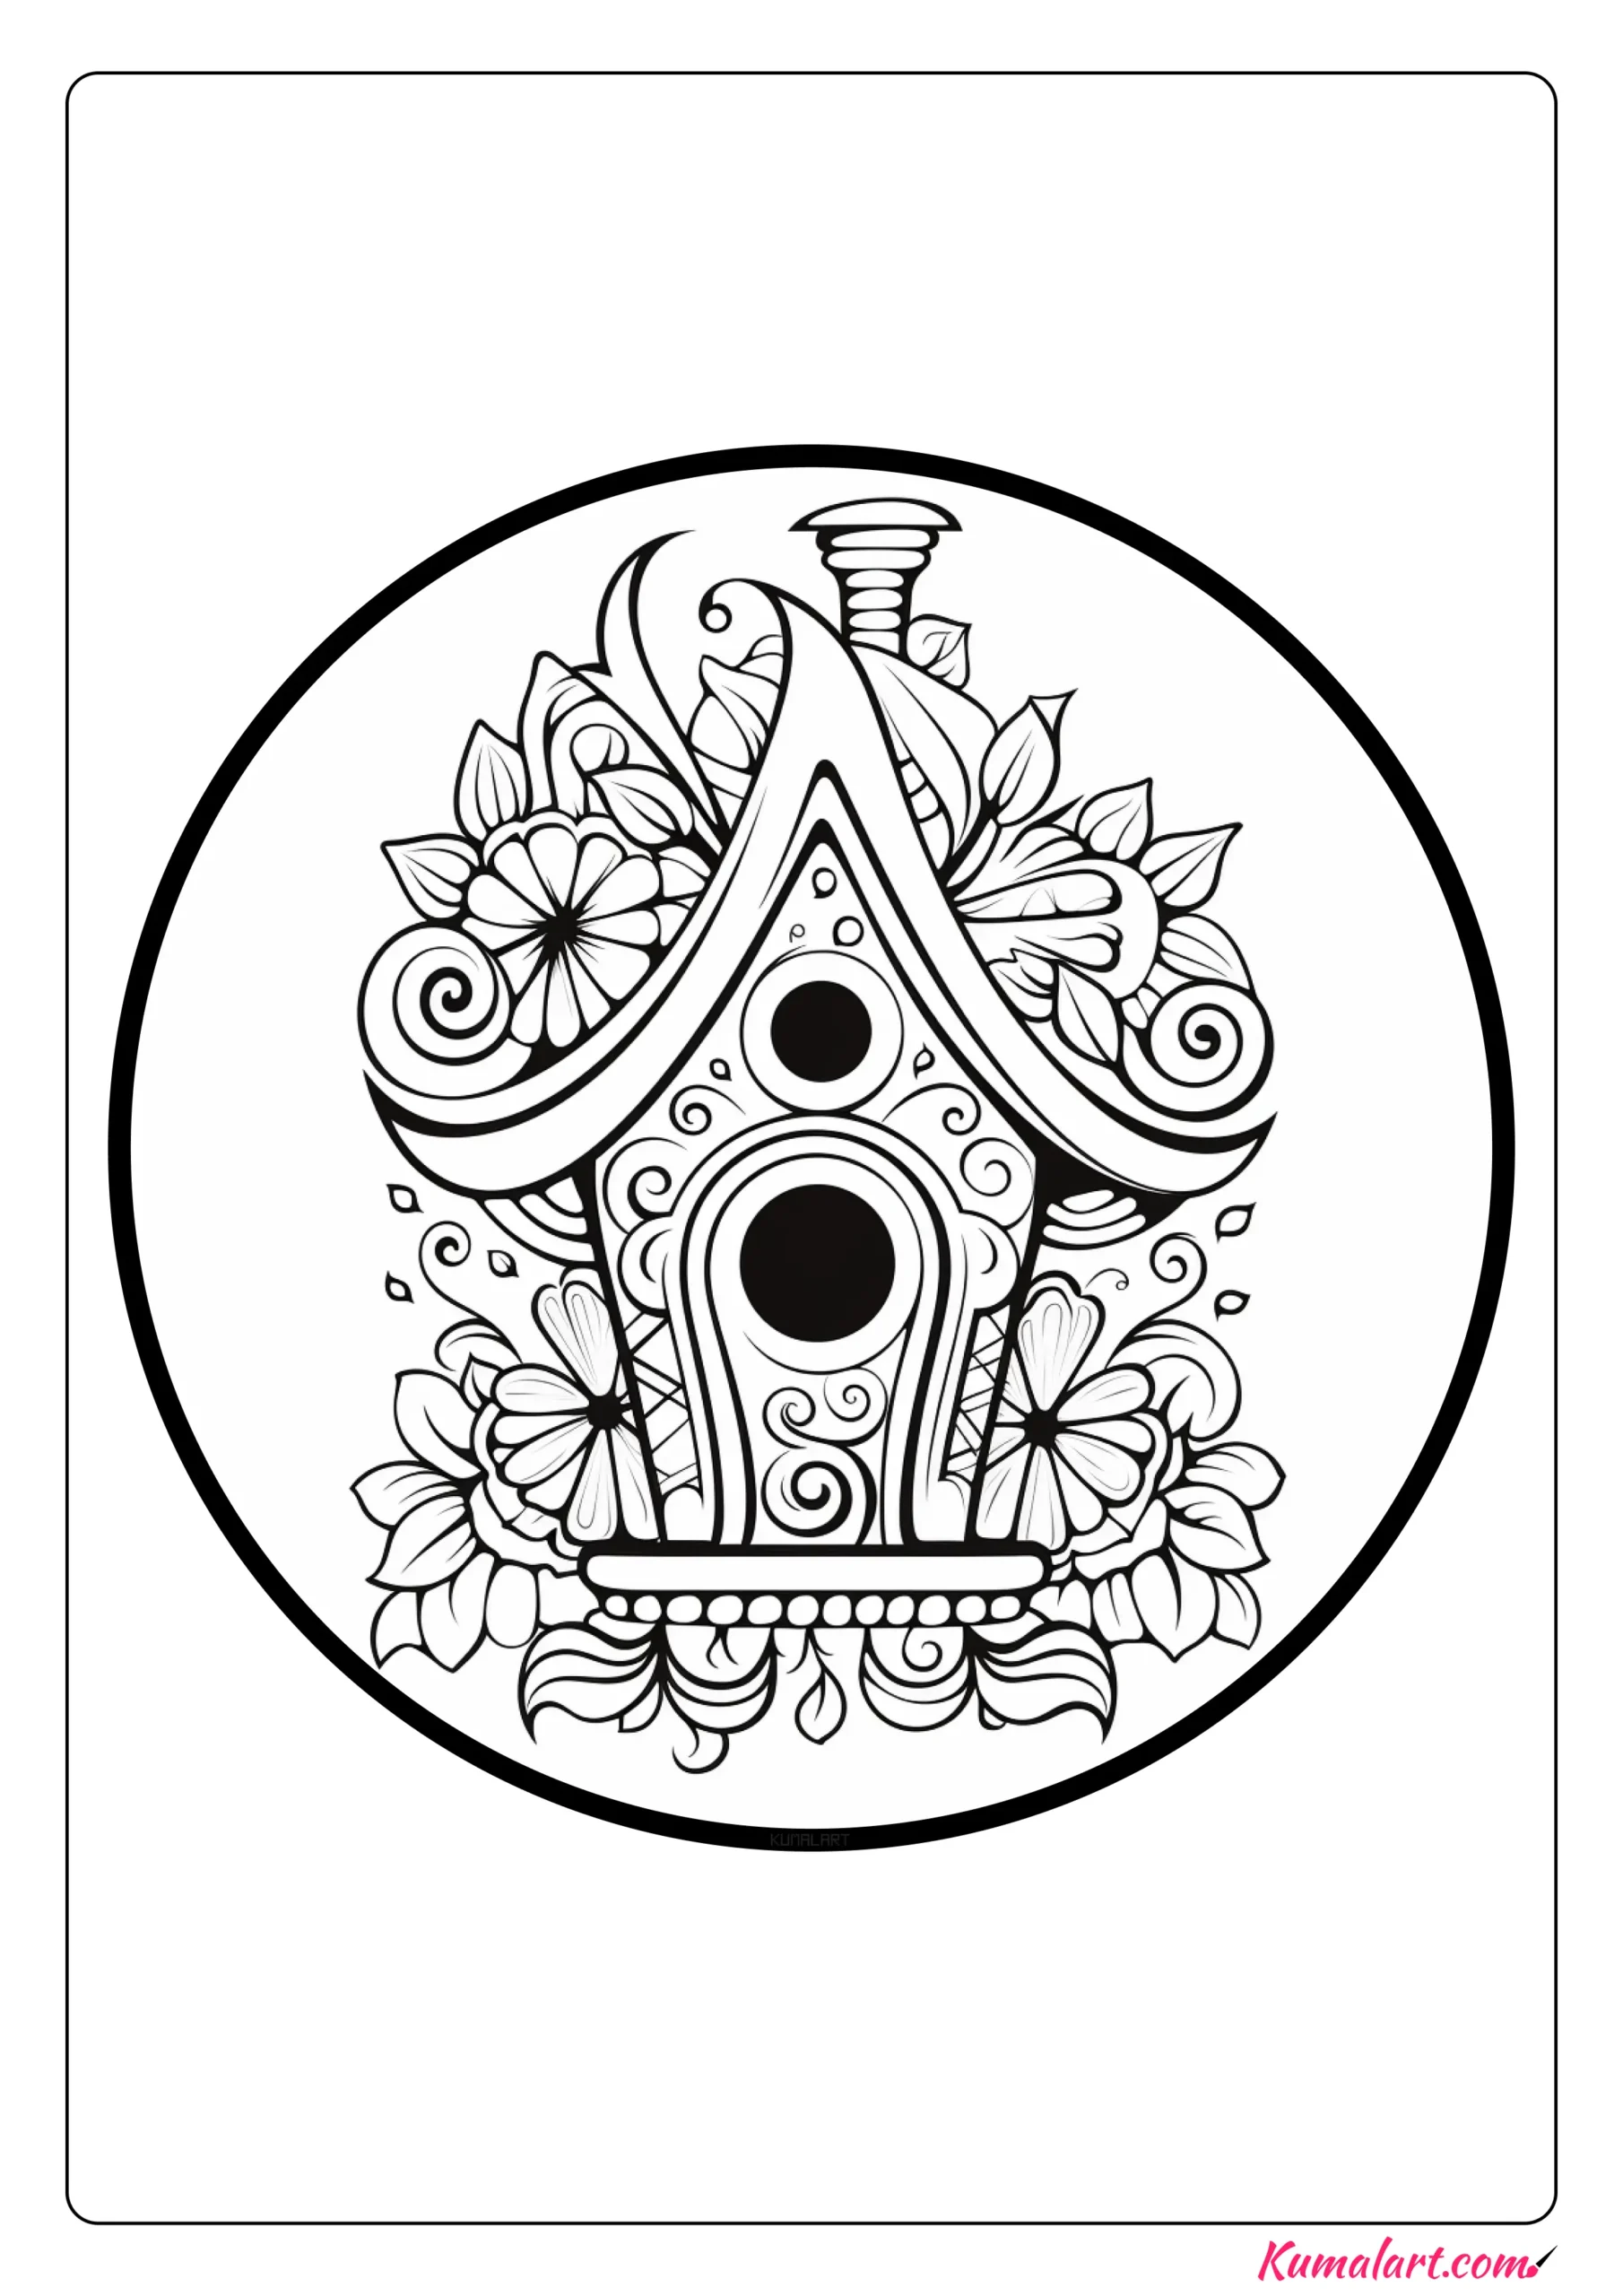 Musical Birdhouse Coloring Page